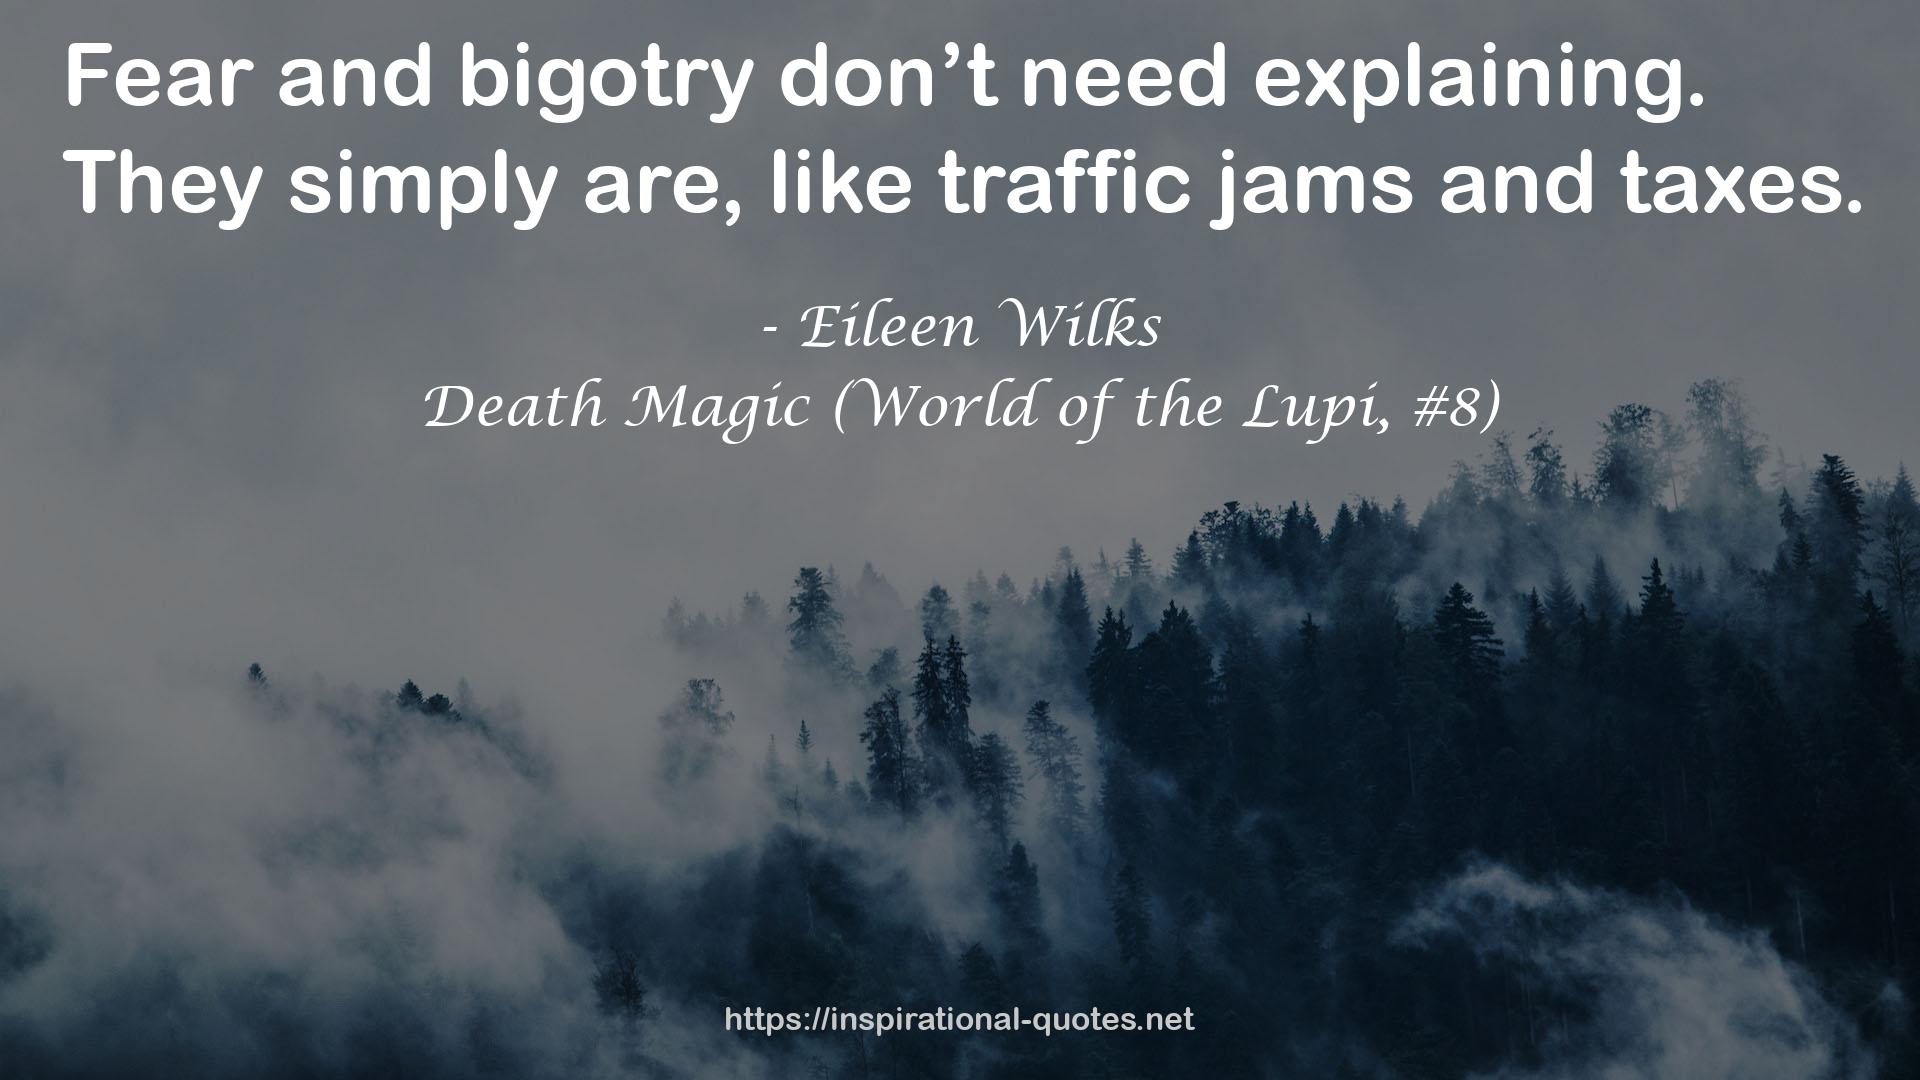 Death Magic (World of the Lupi, #8) QUOTES